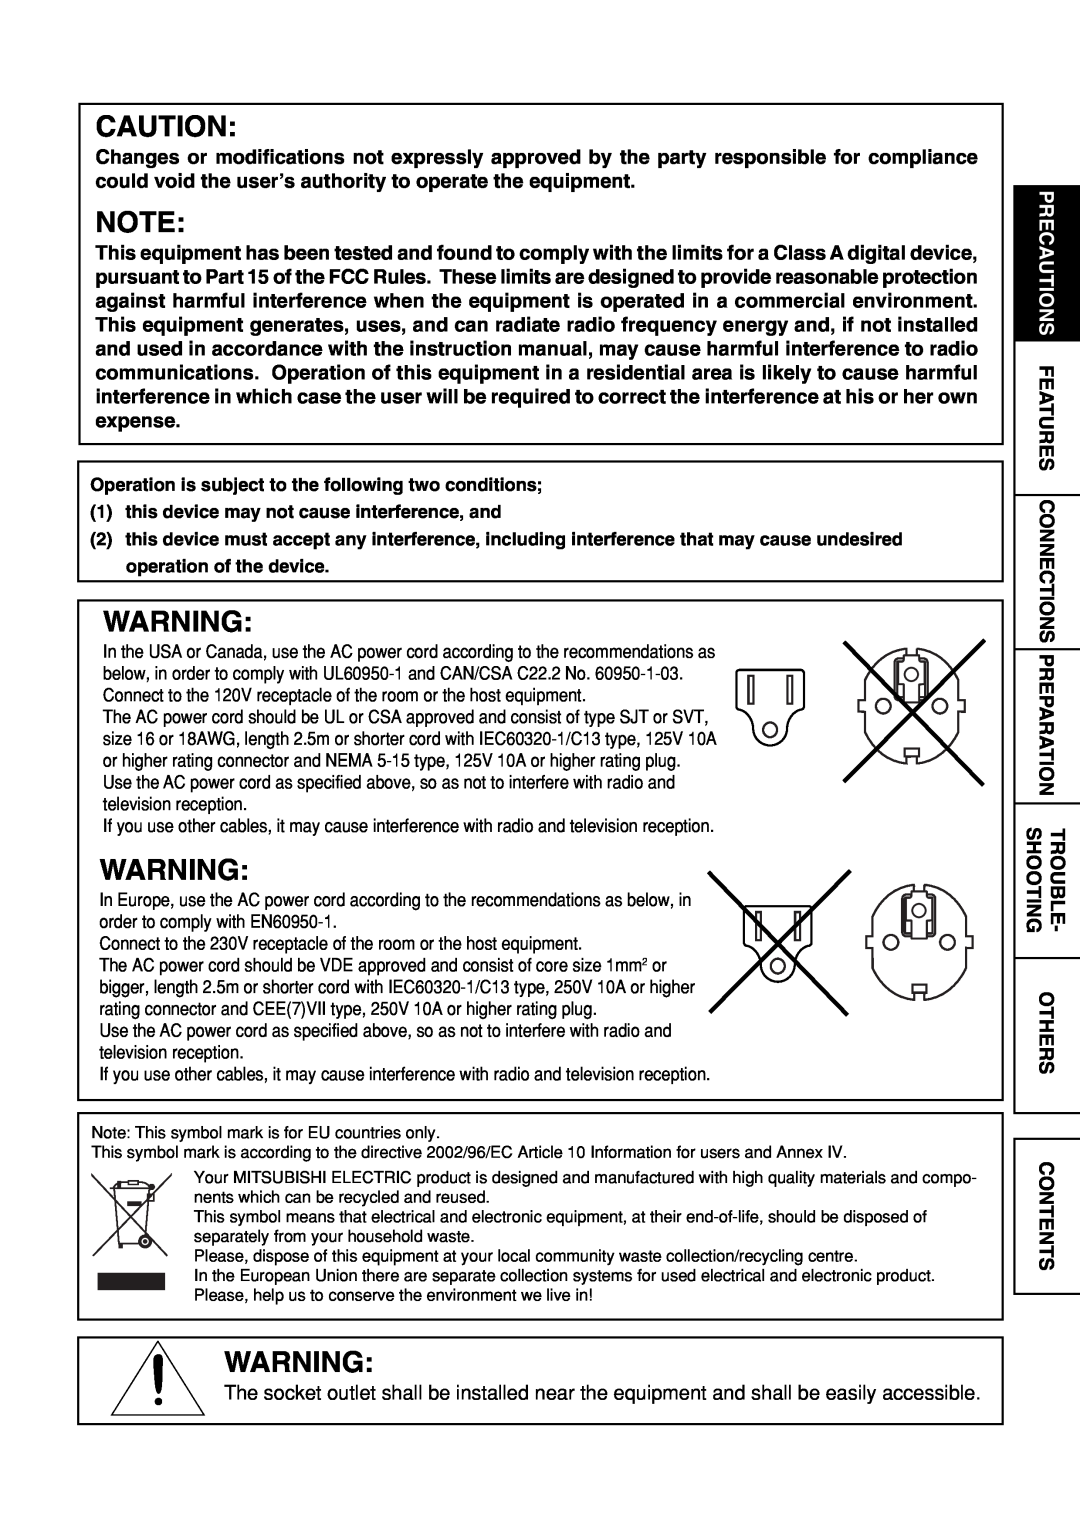 Mitsubishi Electronics CP9600DW-S operation manual Contents, Operation is subject to the following two conditions 